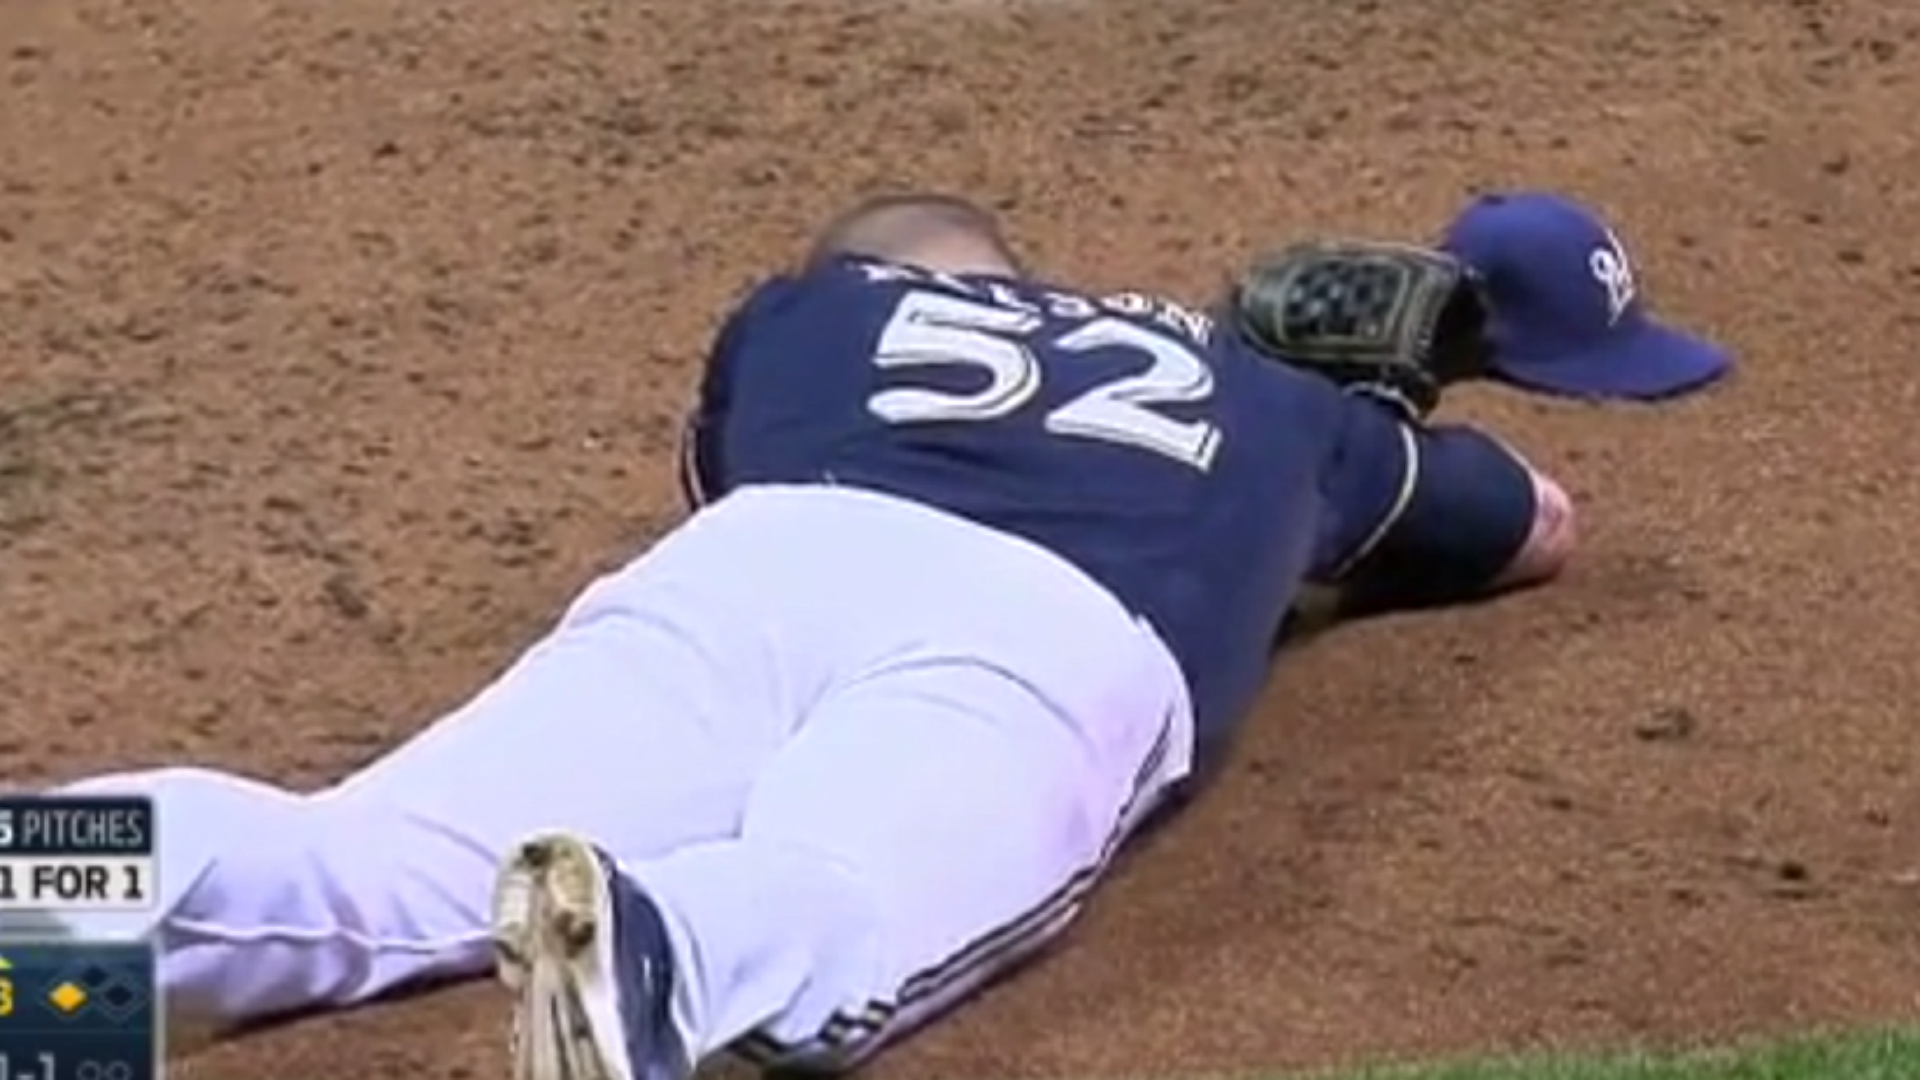 Brewers pitcher Jimmy Nelson taken to hospital after line drive to head | Sporting ...1920 x 1080